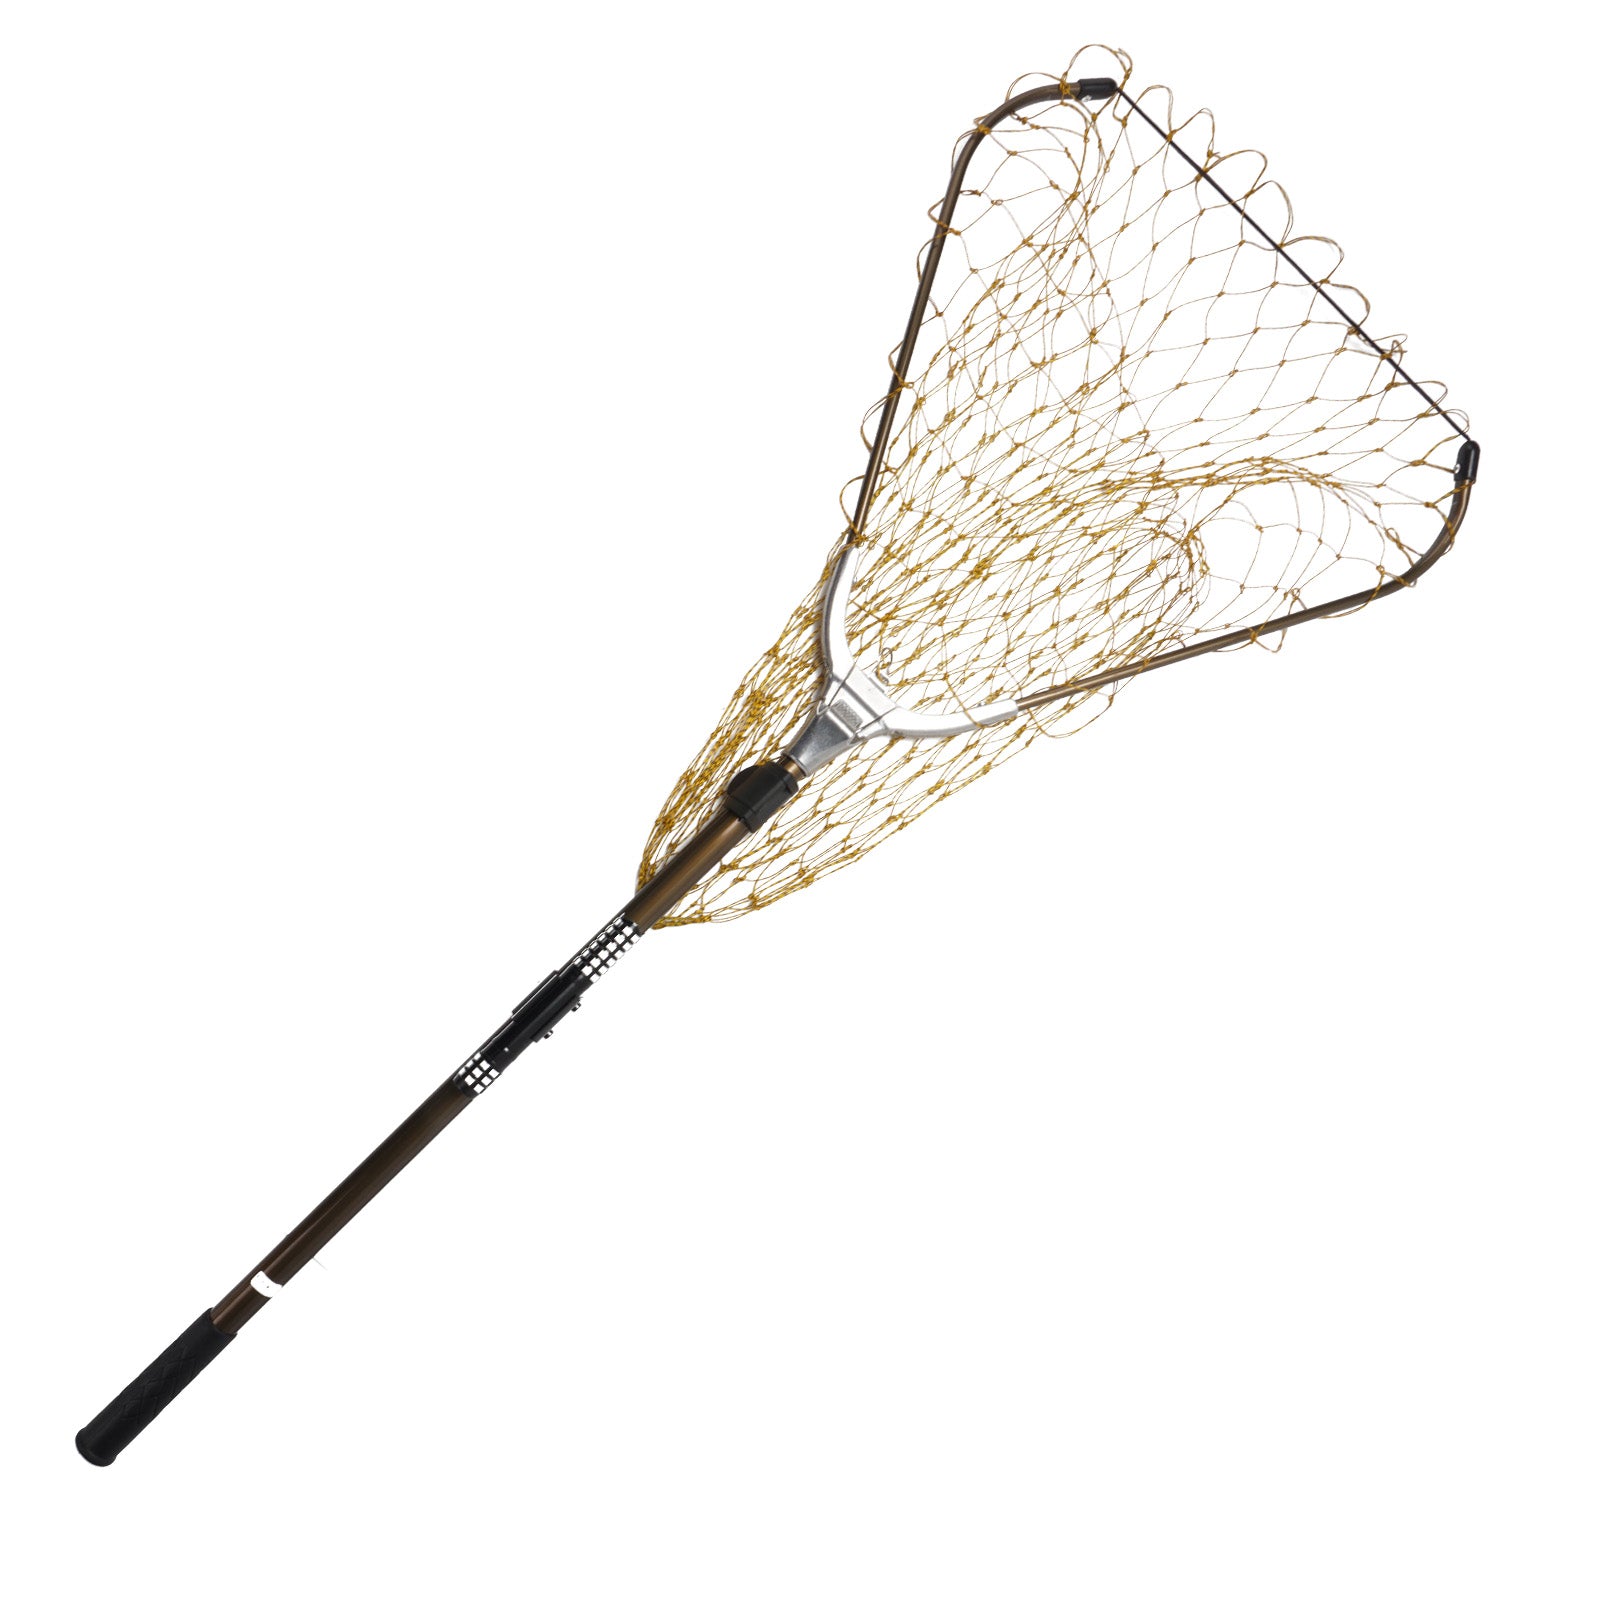  Animal Catch Pole Control Tool Net, Poultry Catching